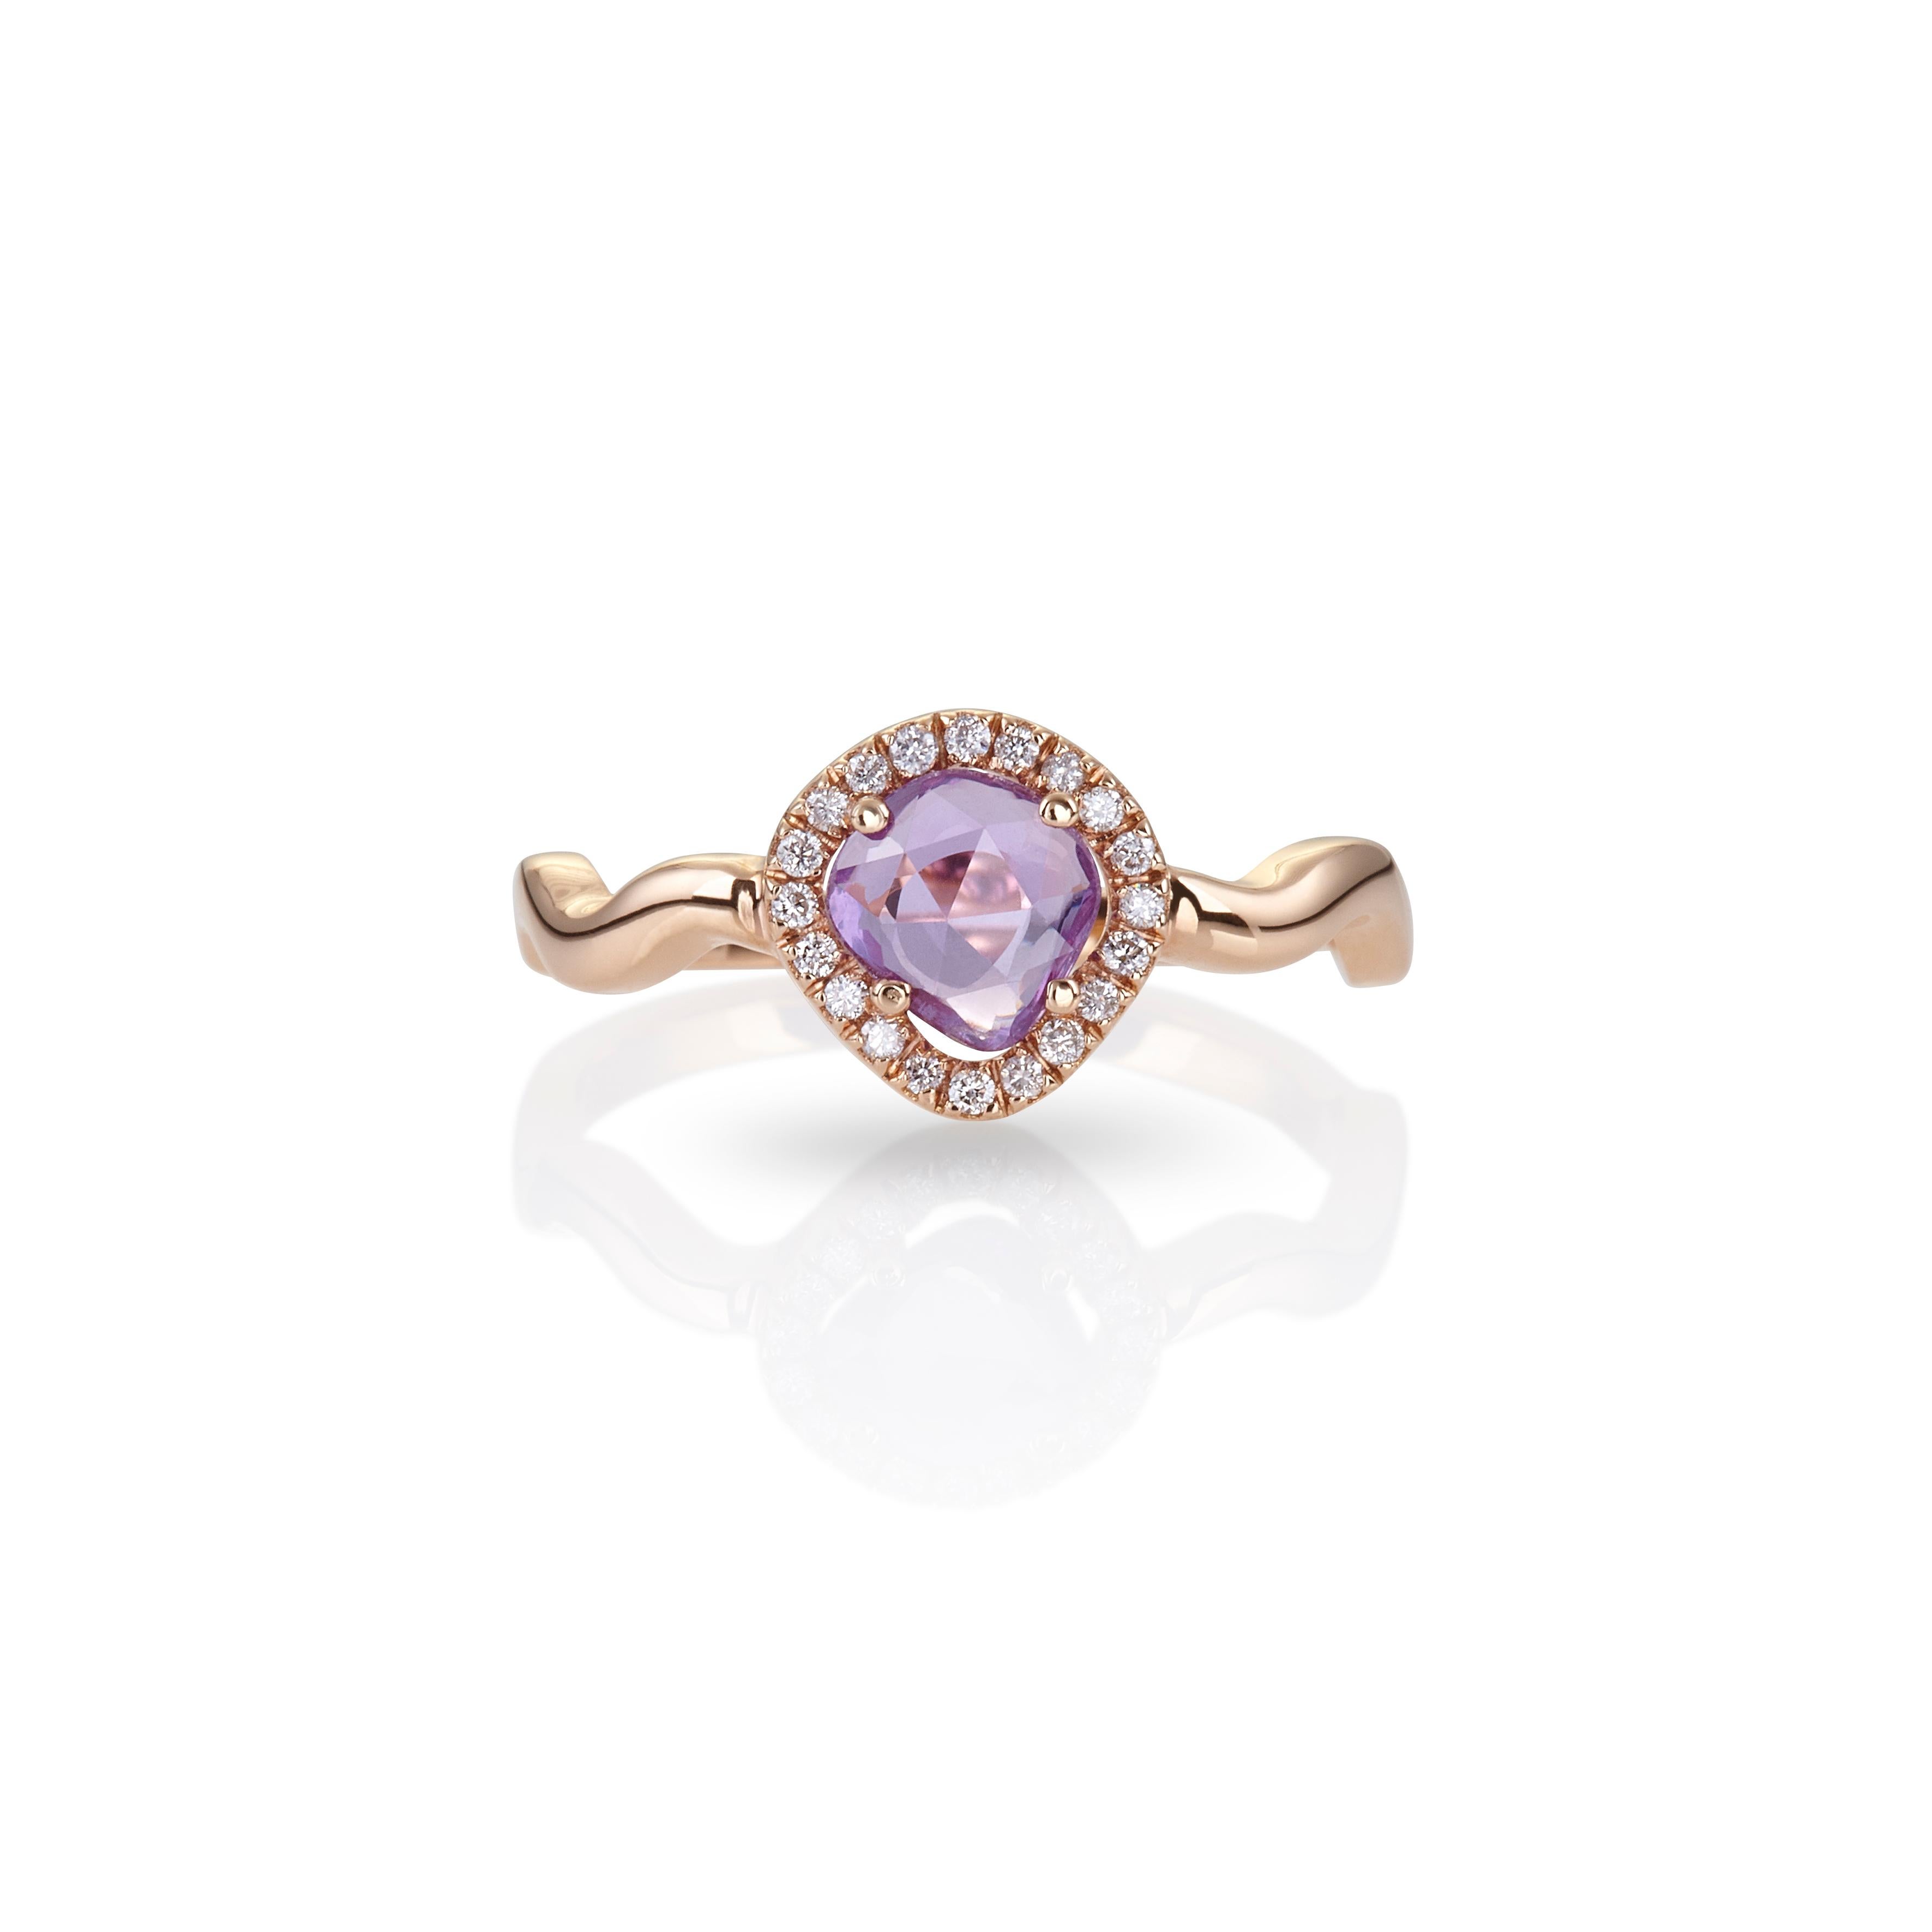 For Sale:  Zic Zac Ring in 18Kt Rose Gold with Pink, Violet Rose Cut Sapphire and Diamond 2